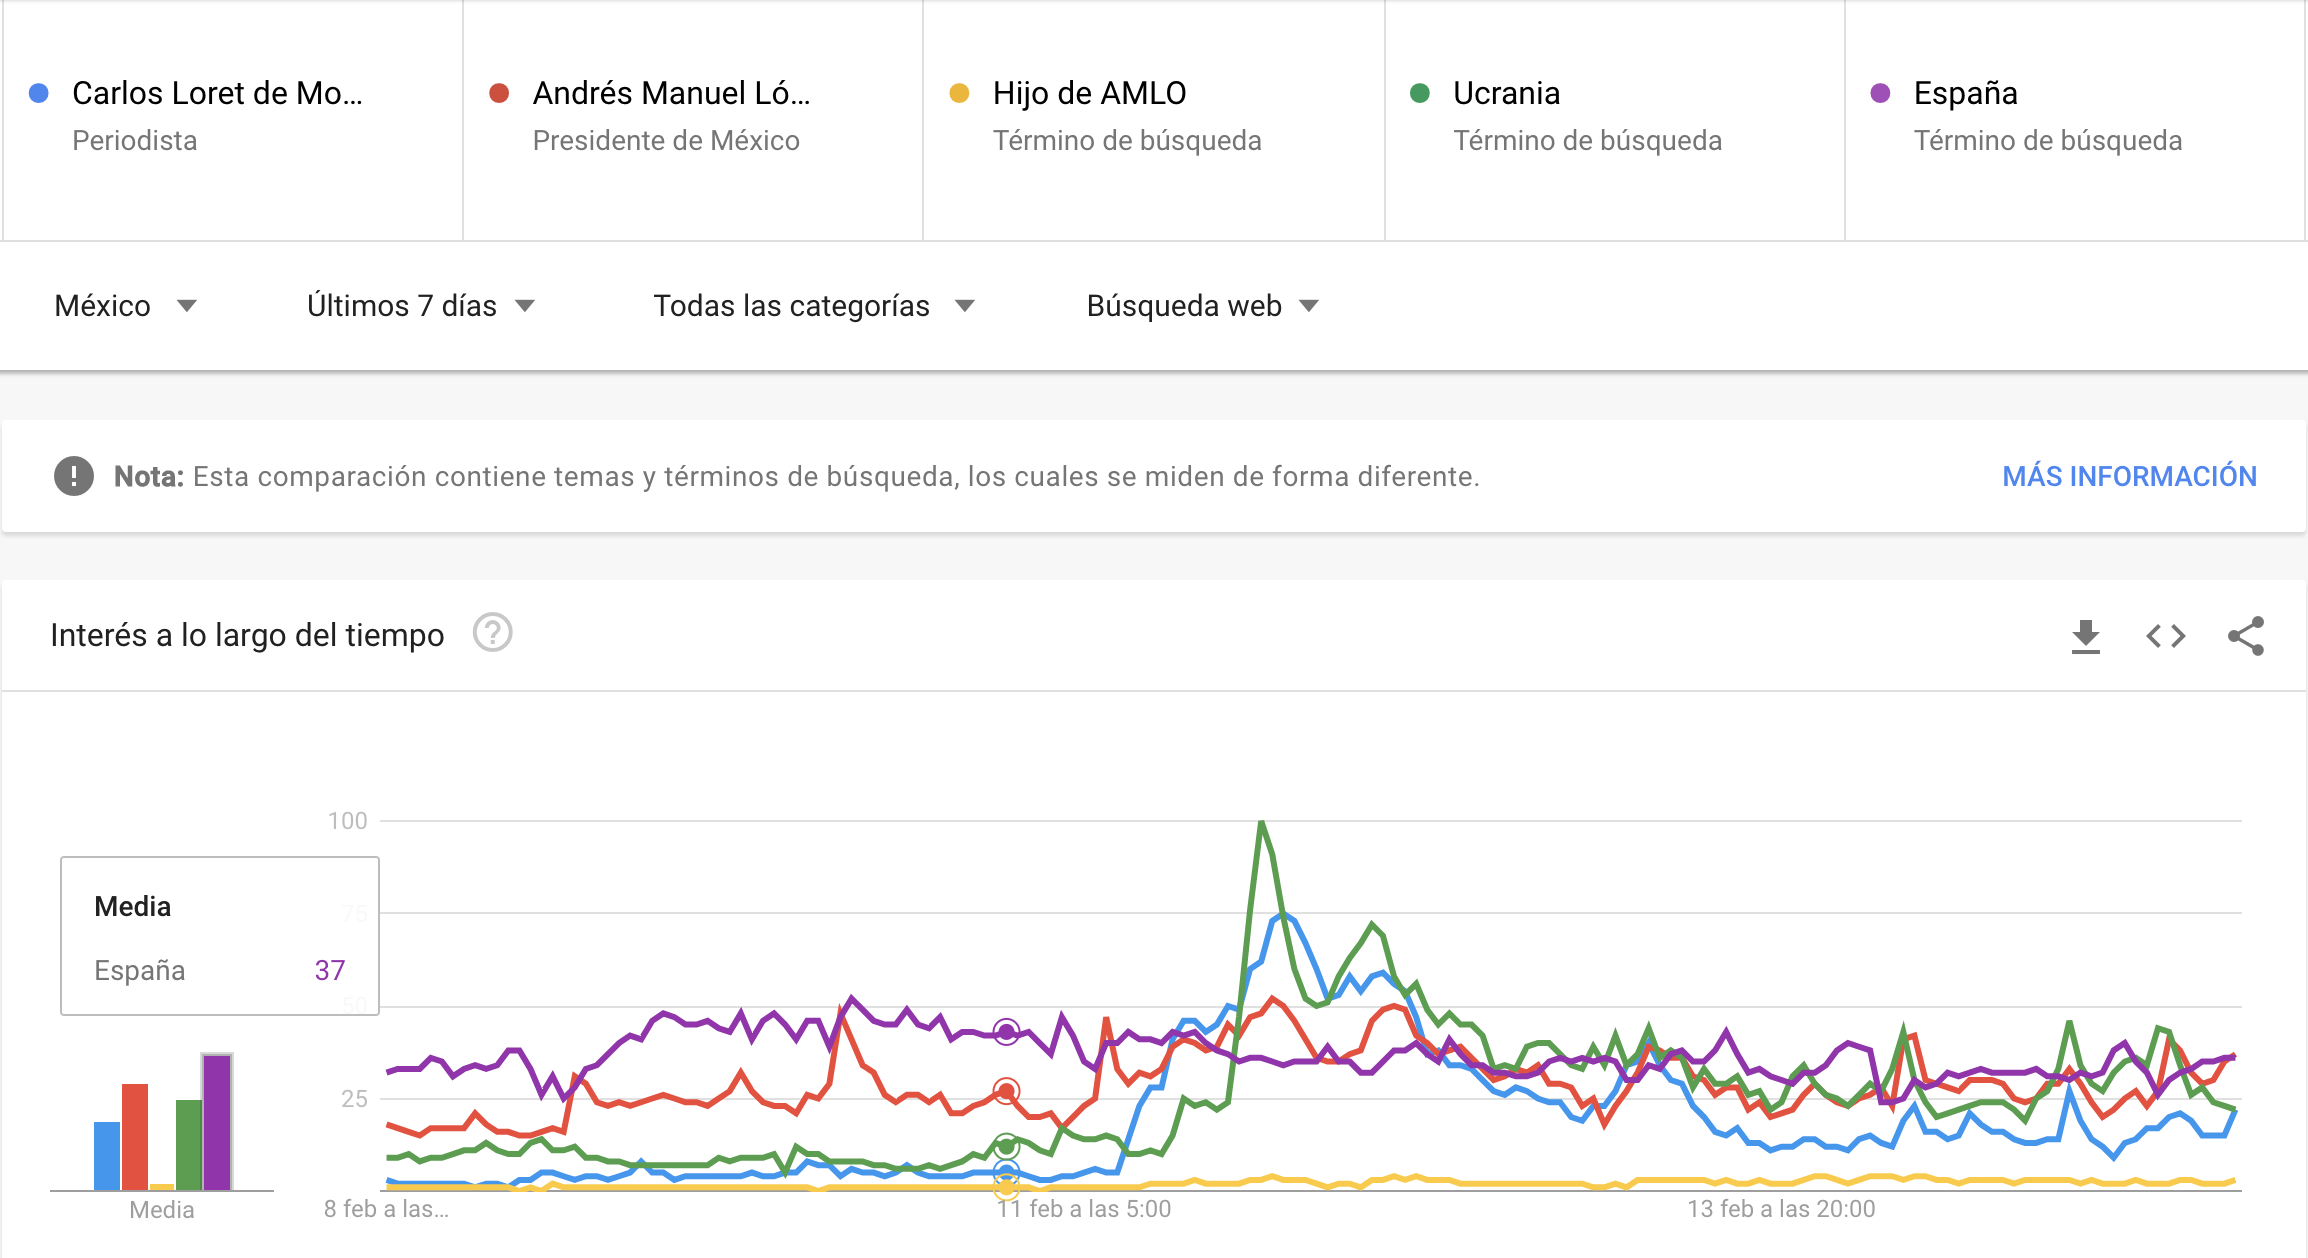 This is how AMLO benefited Loret de Mola in conversation and digital search